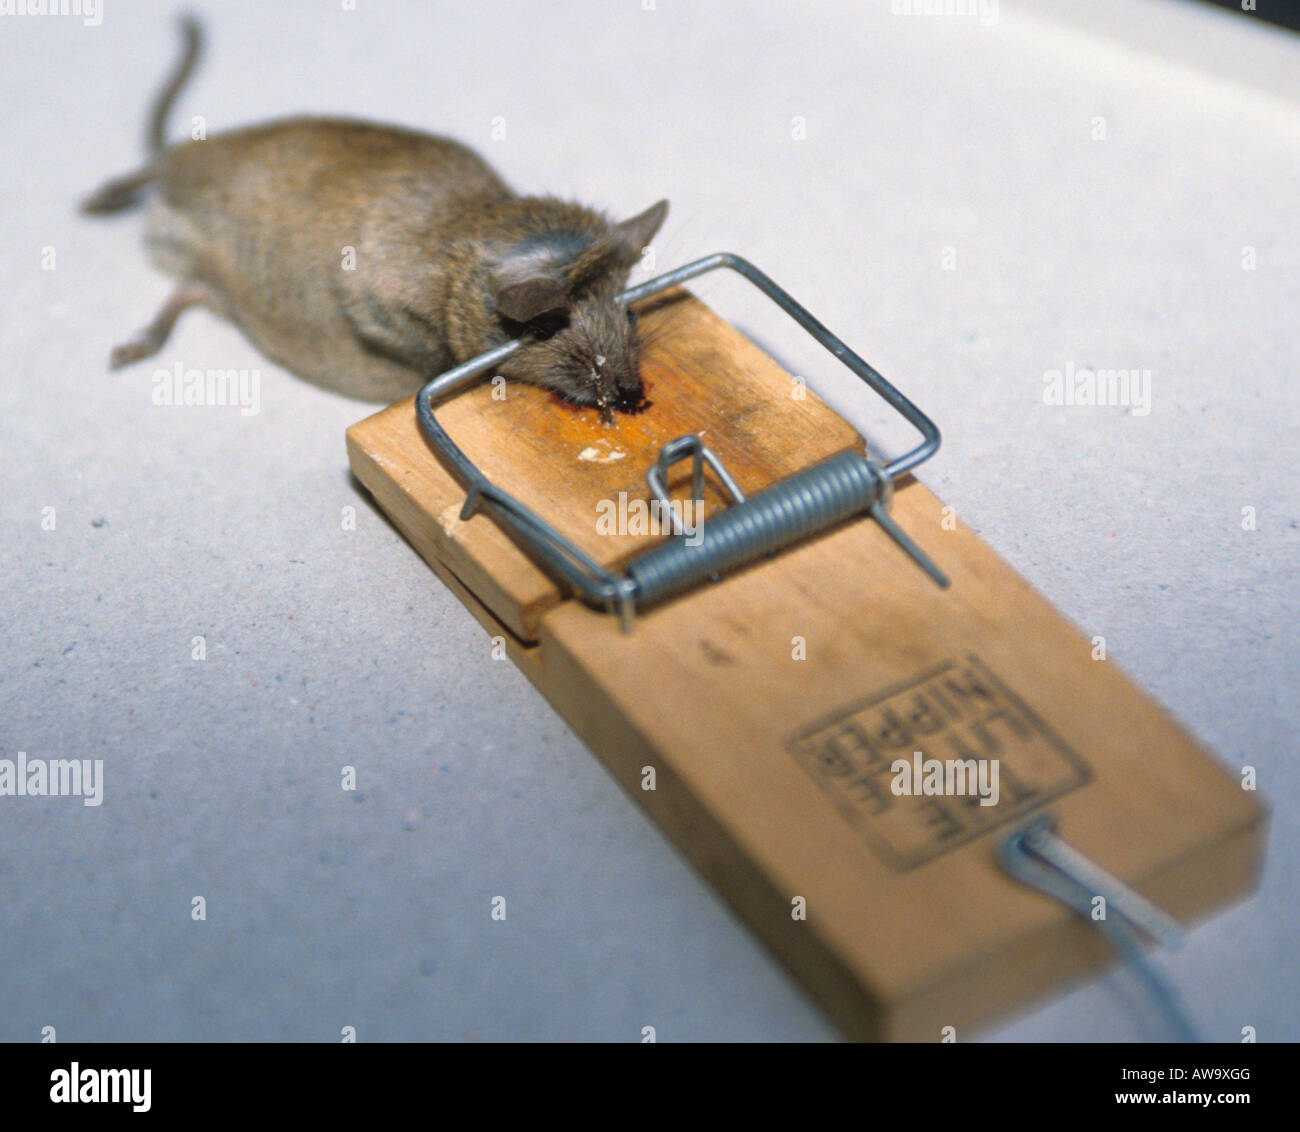 https://c8.alamy.com/comp/AW9XGG/dead-mouse-caught-in-a-mouse-trap-AW9XGG.jpg